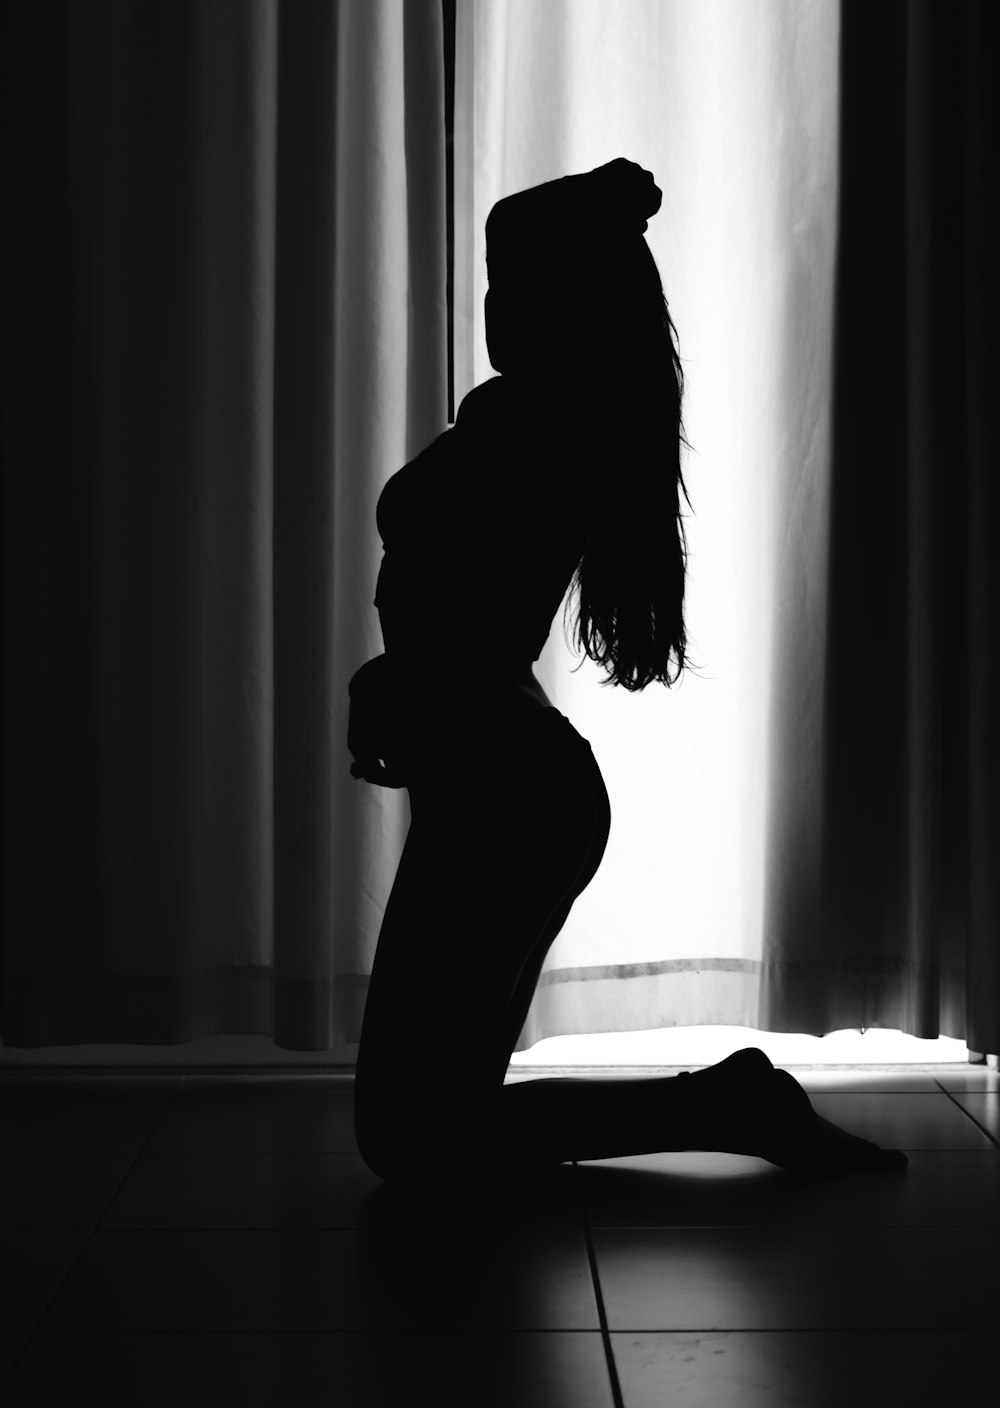 silhouette of woman standing in front of window curtain